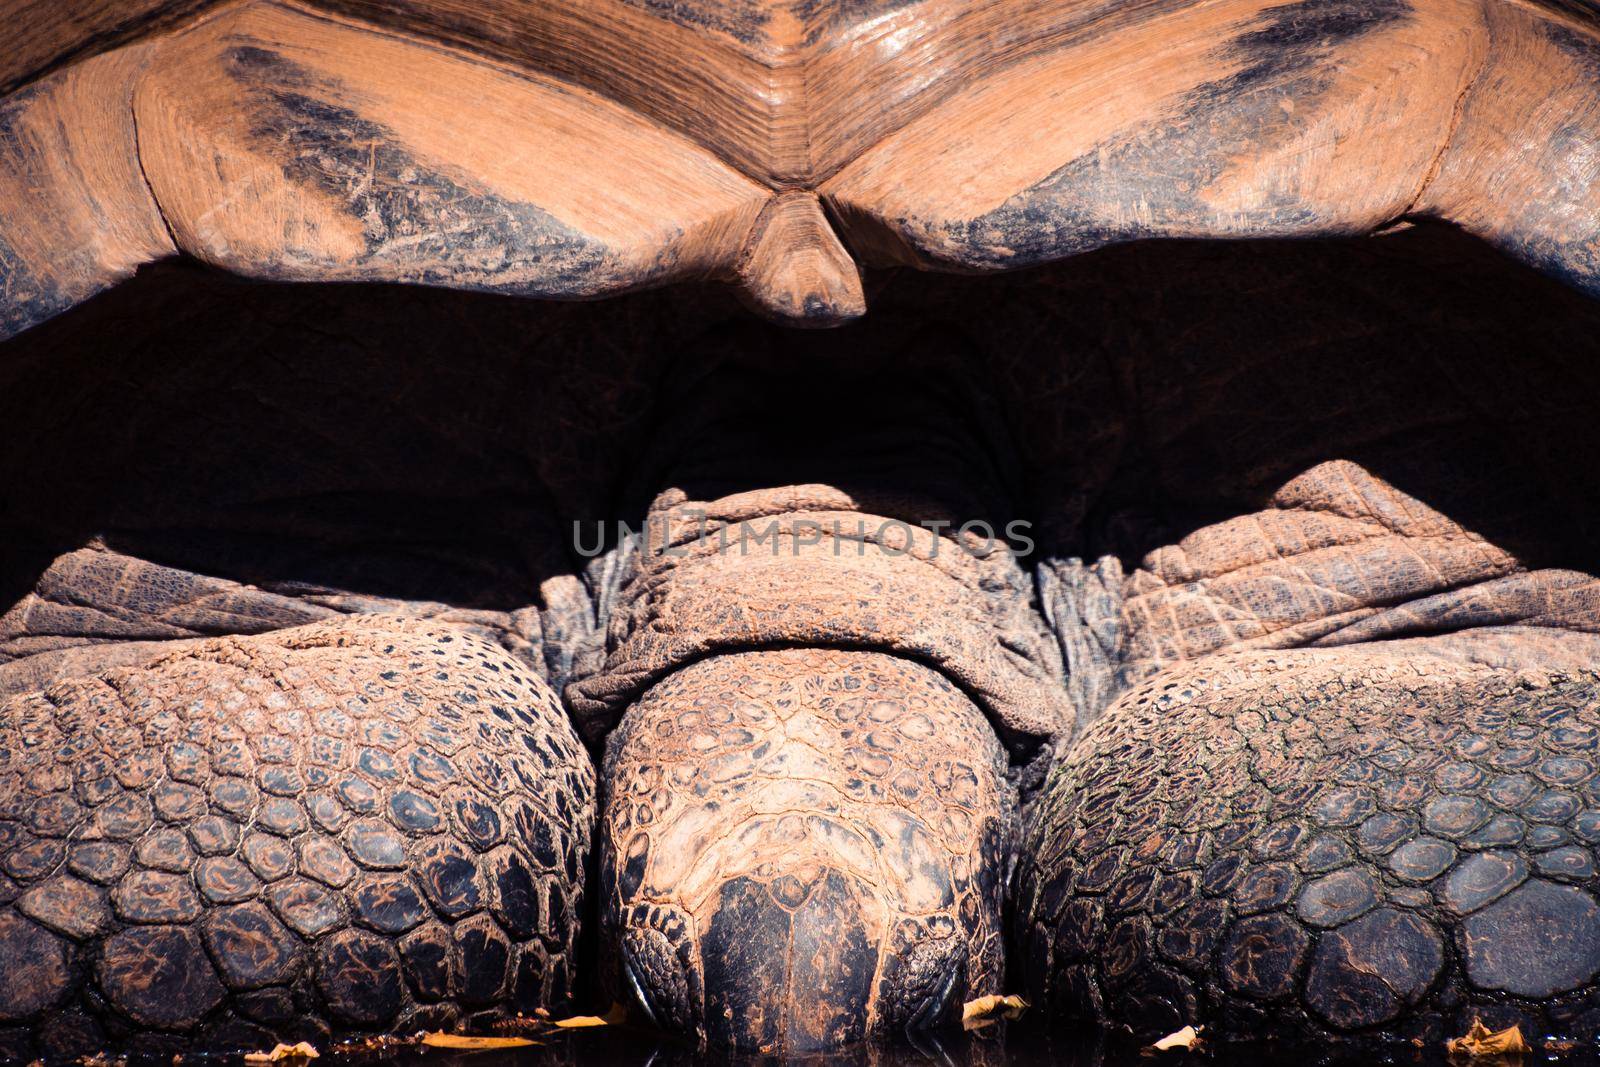 Close-up on a giant Aldabra tortoise